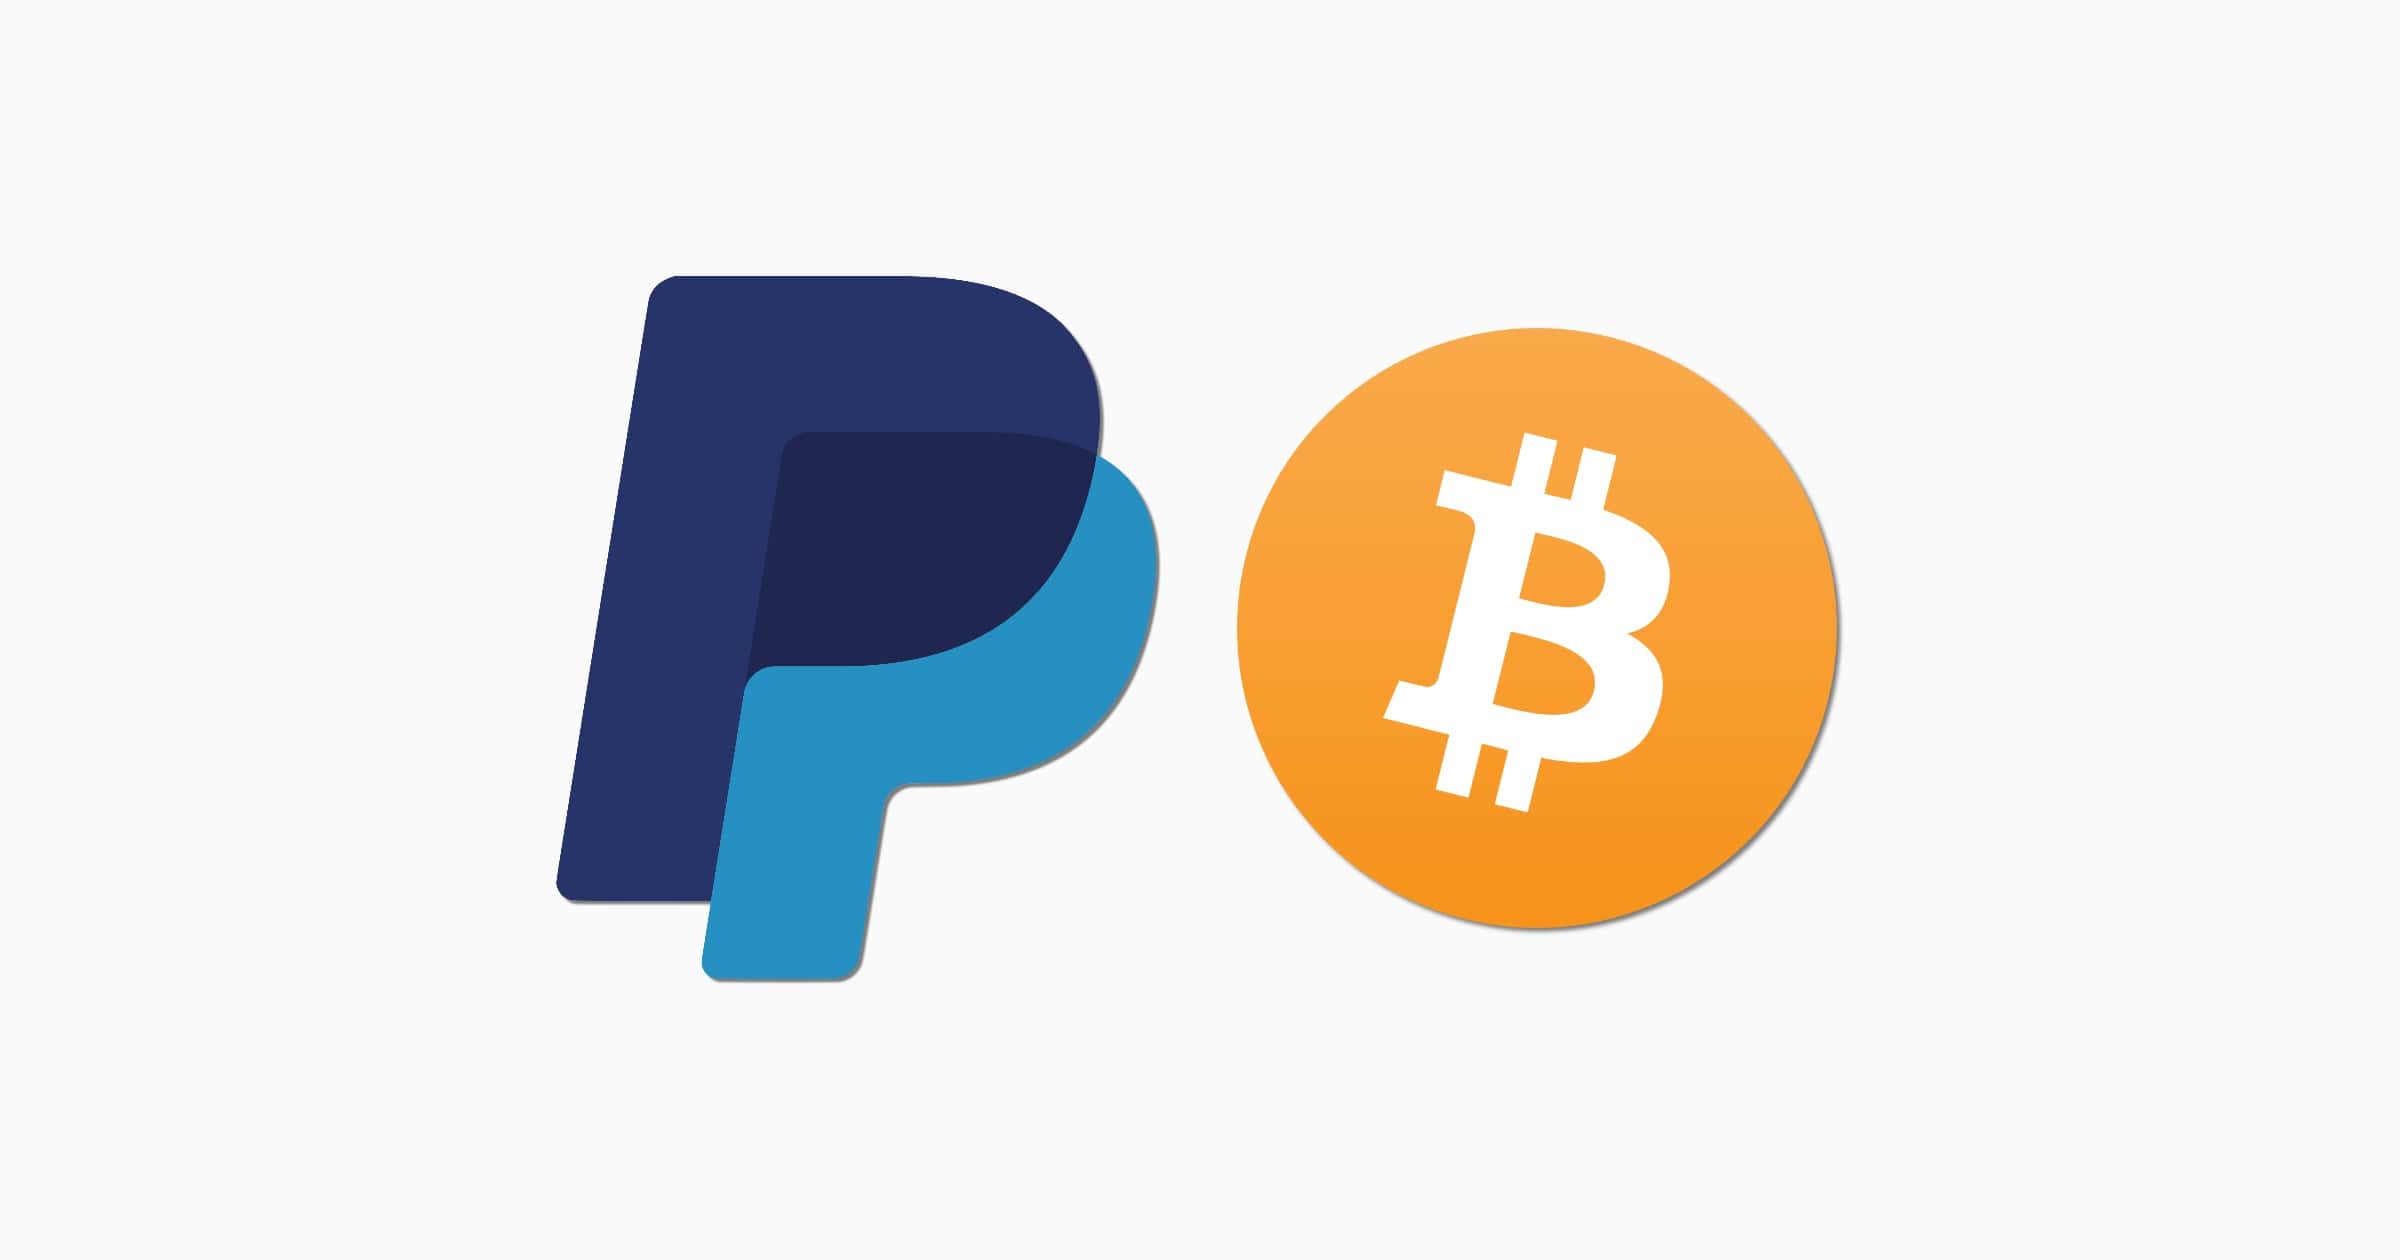 PayPal users can pay with bitcoin